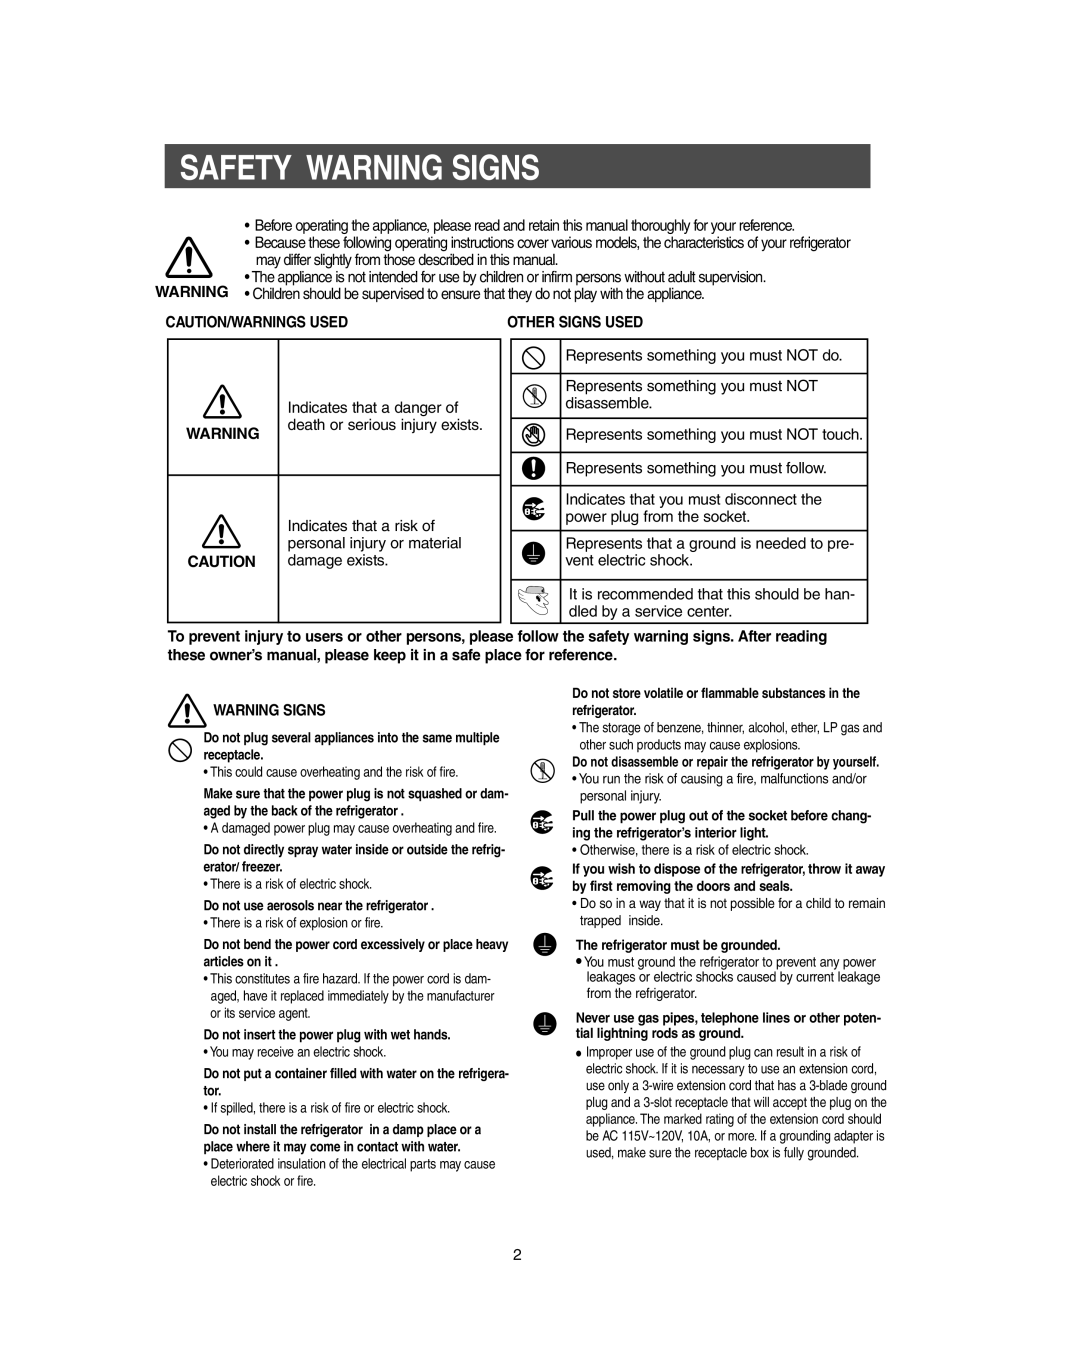 Samsung RS267LBSH owner manual Safety Warning Signs, Caution/Warnings Used, Other Signs Used 